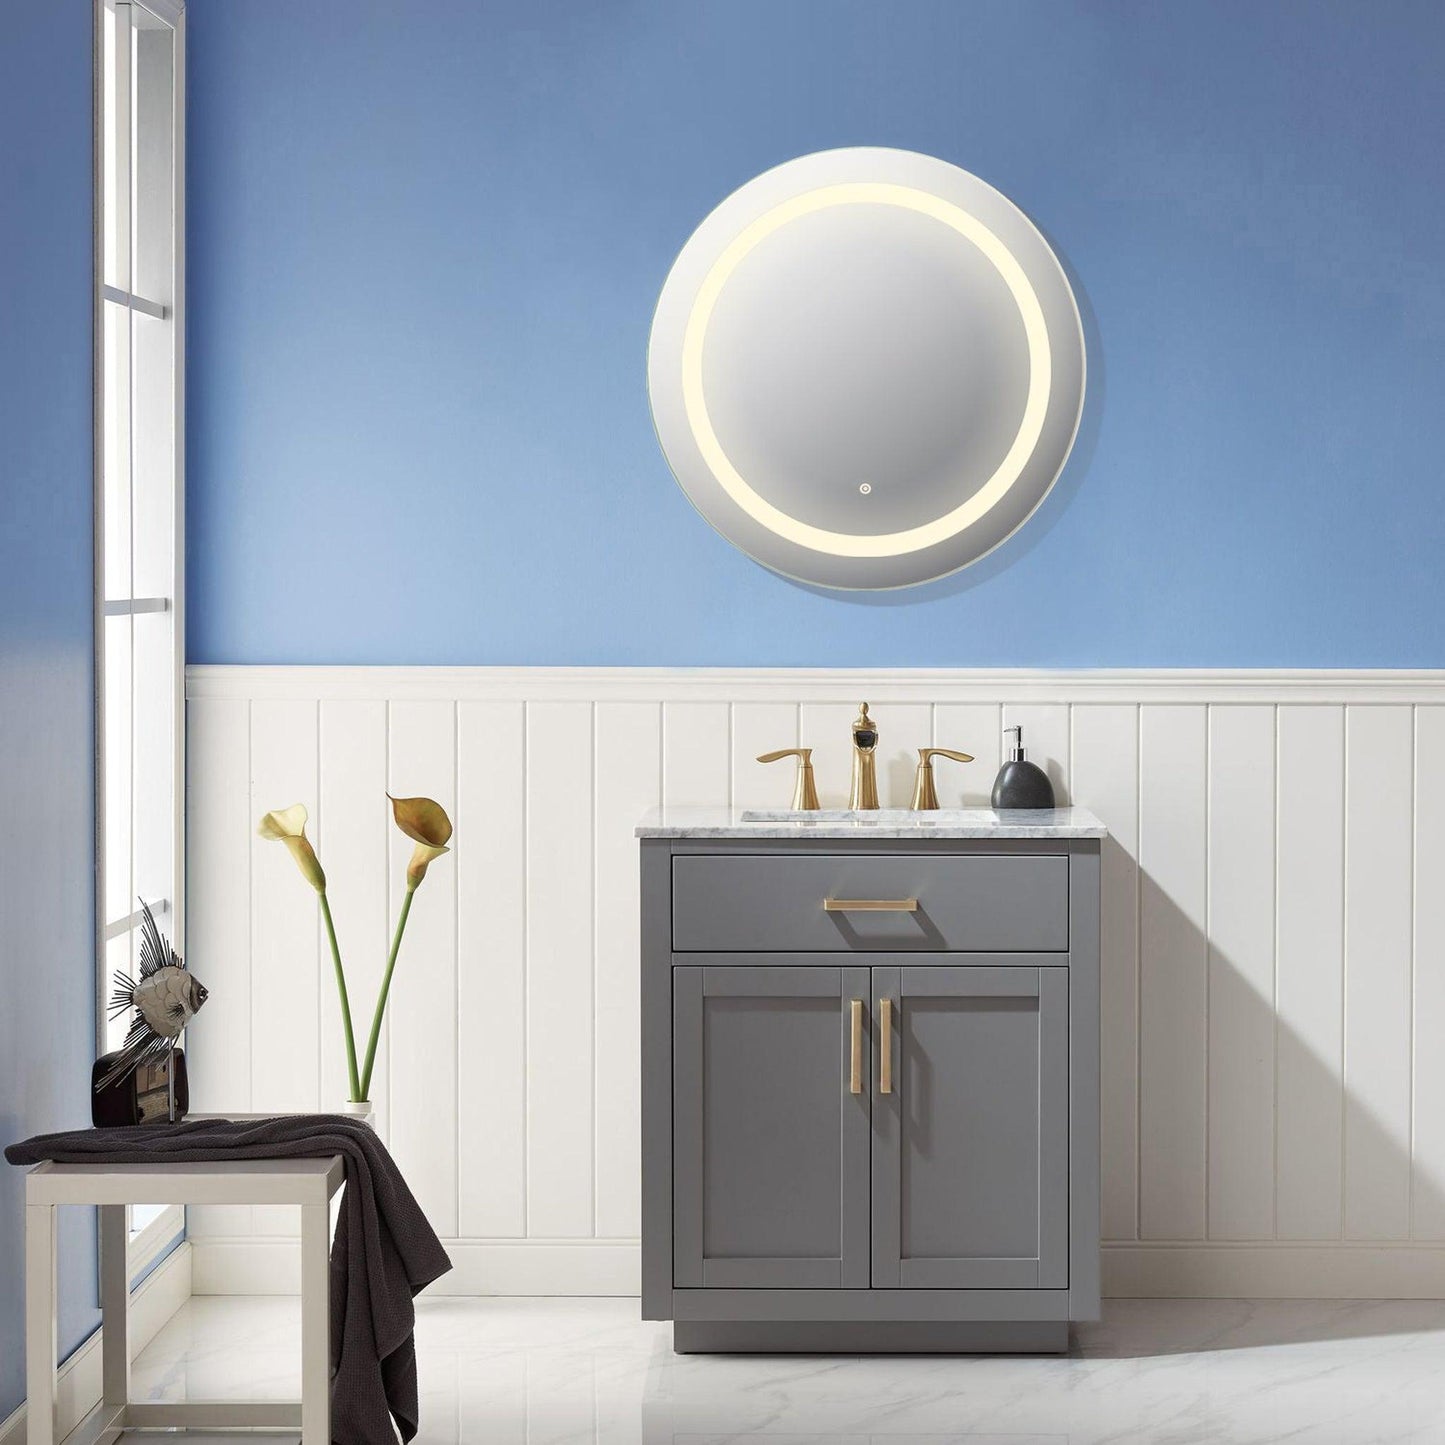 Altair Padova 24" Round Wall-Mounted LED Mirror